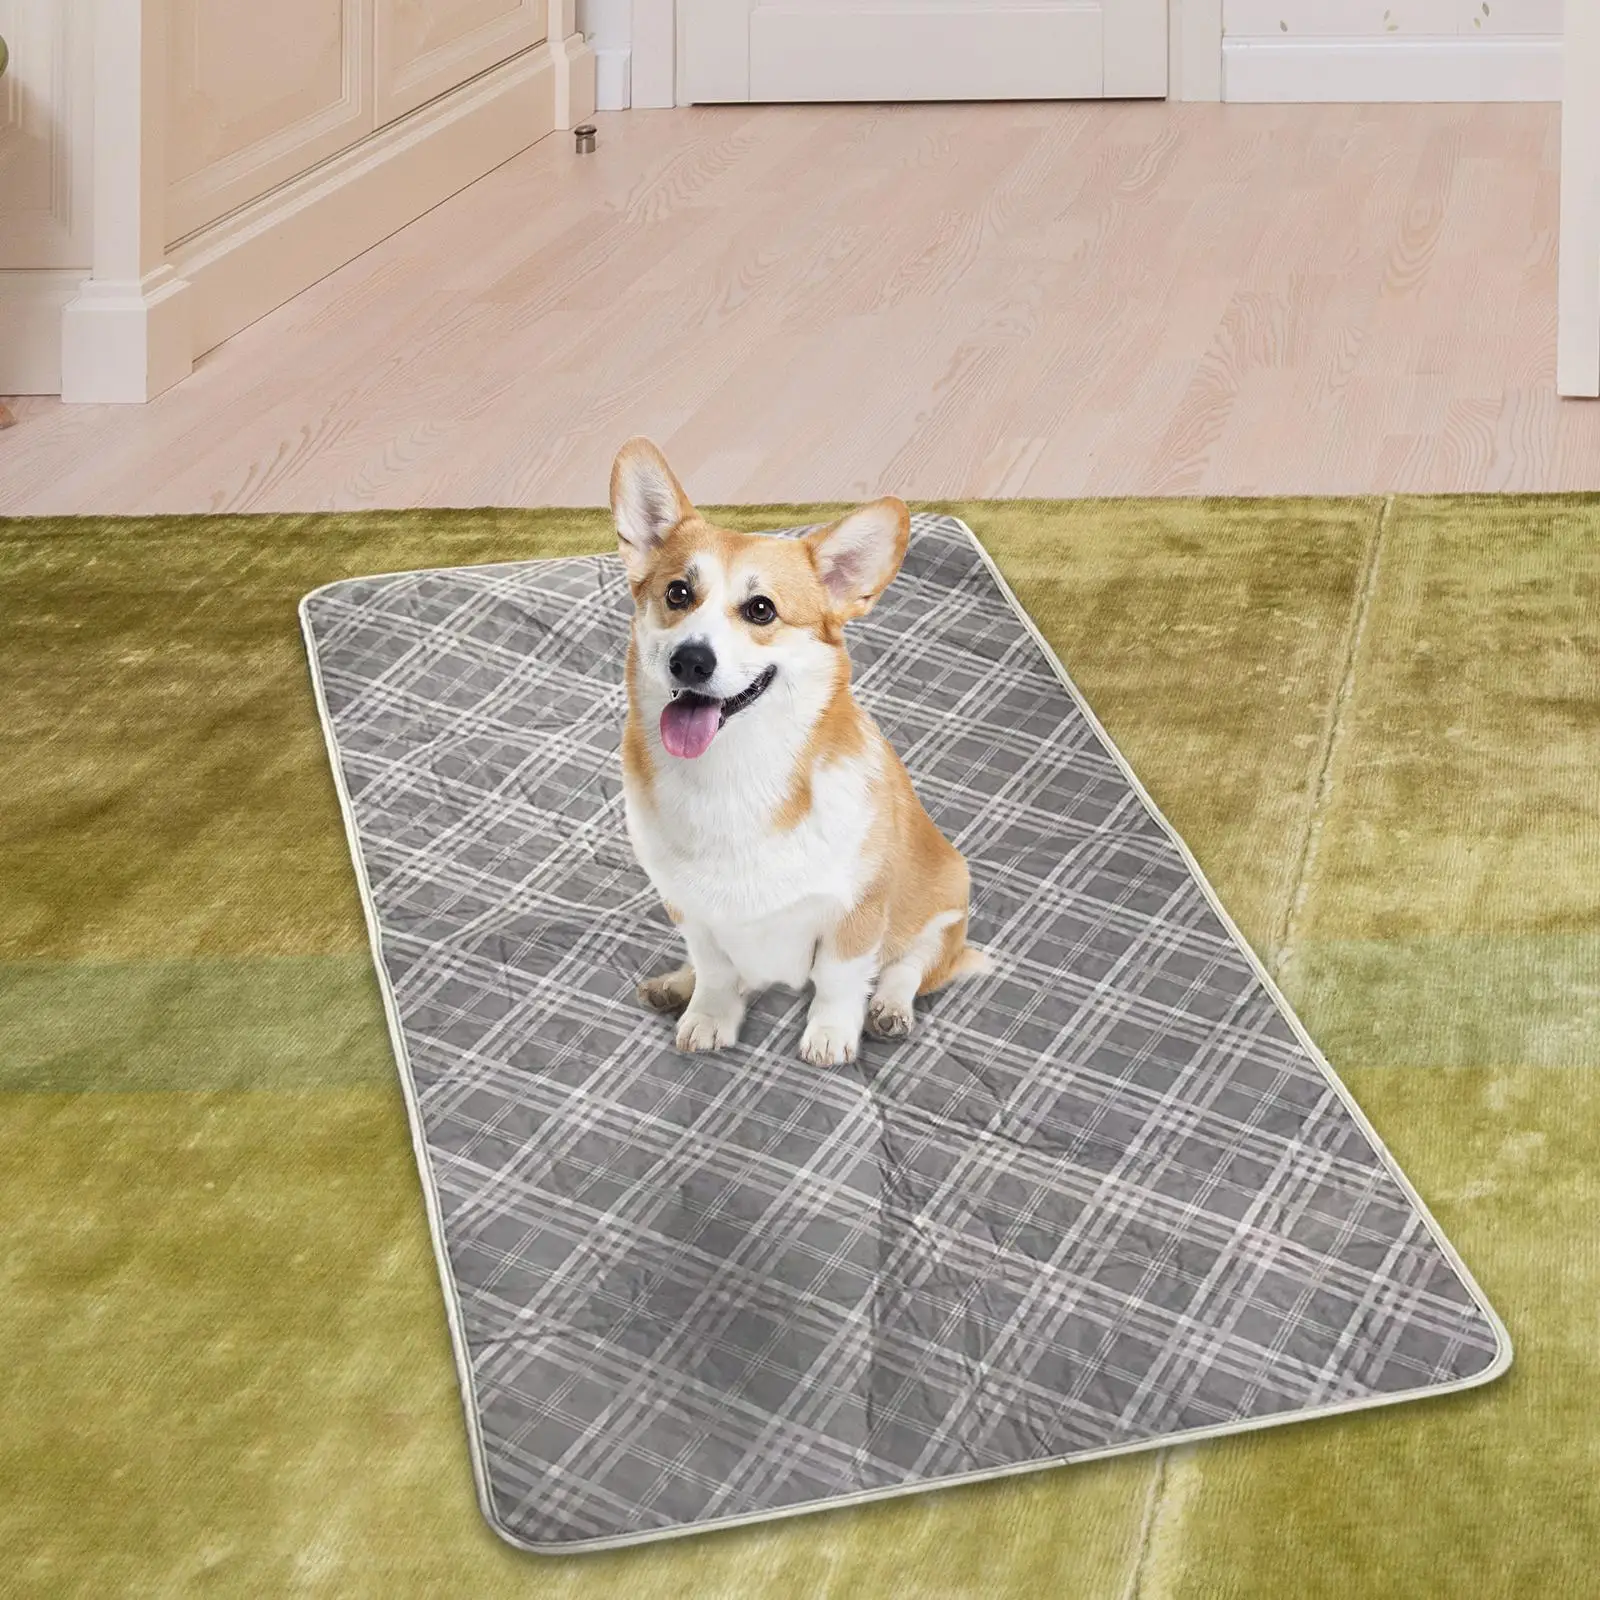 Pet Dog Pee Pad Mat Puppy Absorbent Pad Reusable Washable Cushion Blanket Bed for Crate Playpen Kennel Cage Supplies Home Travel